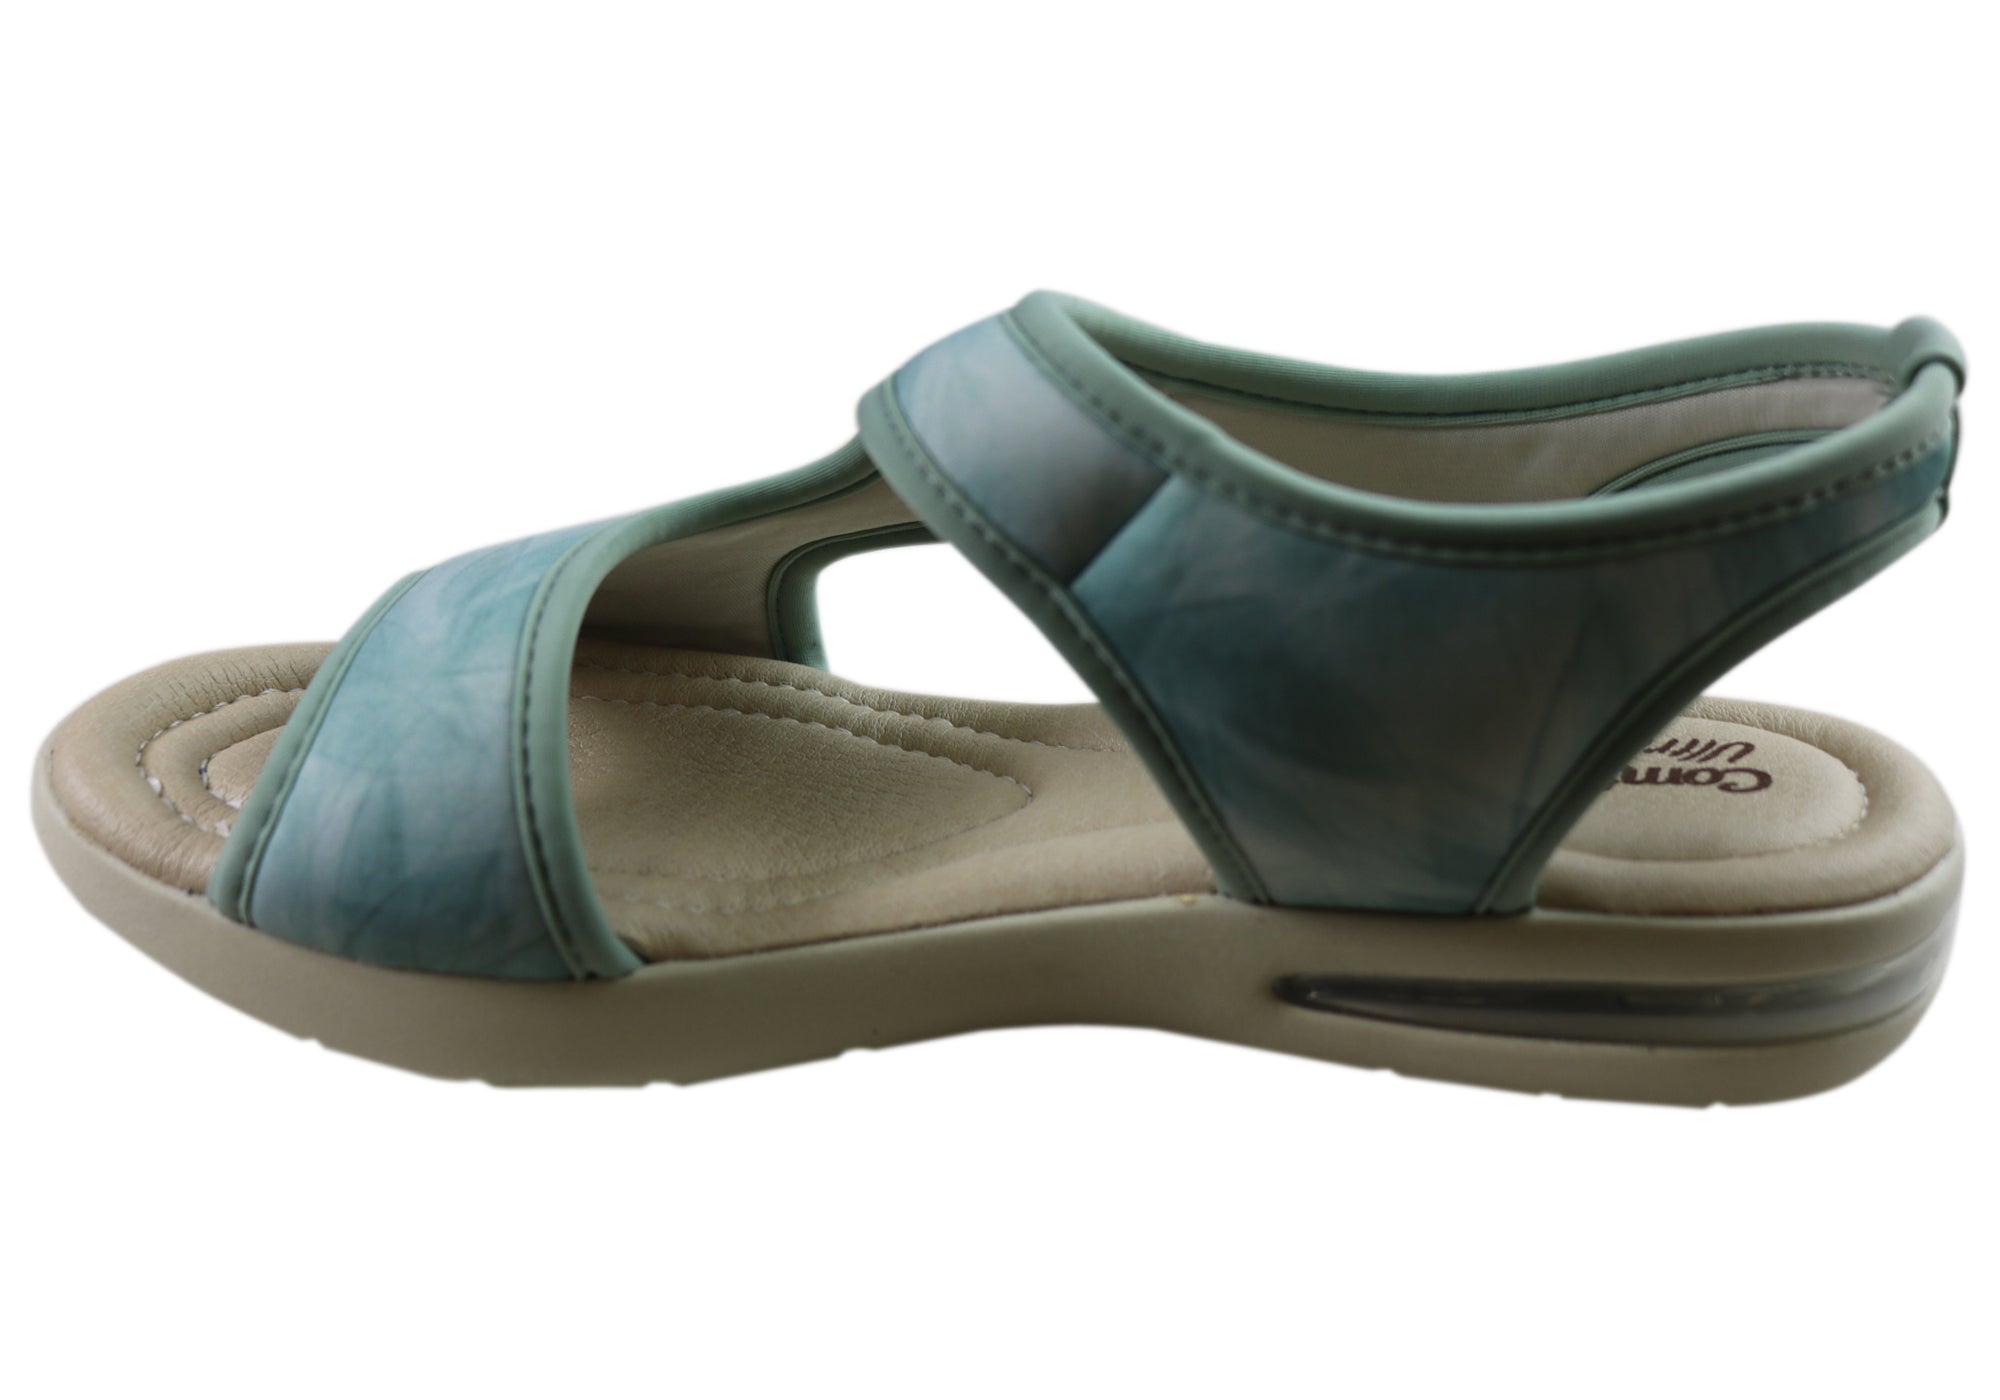 Comfortflex Relax Womens Comfortable Sandals Made In Brazil